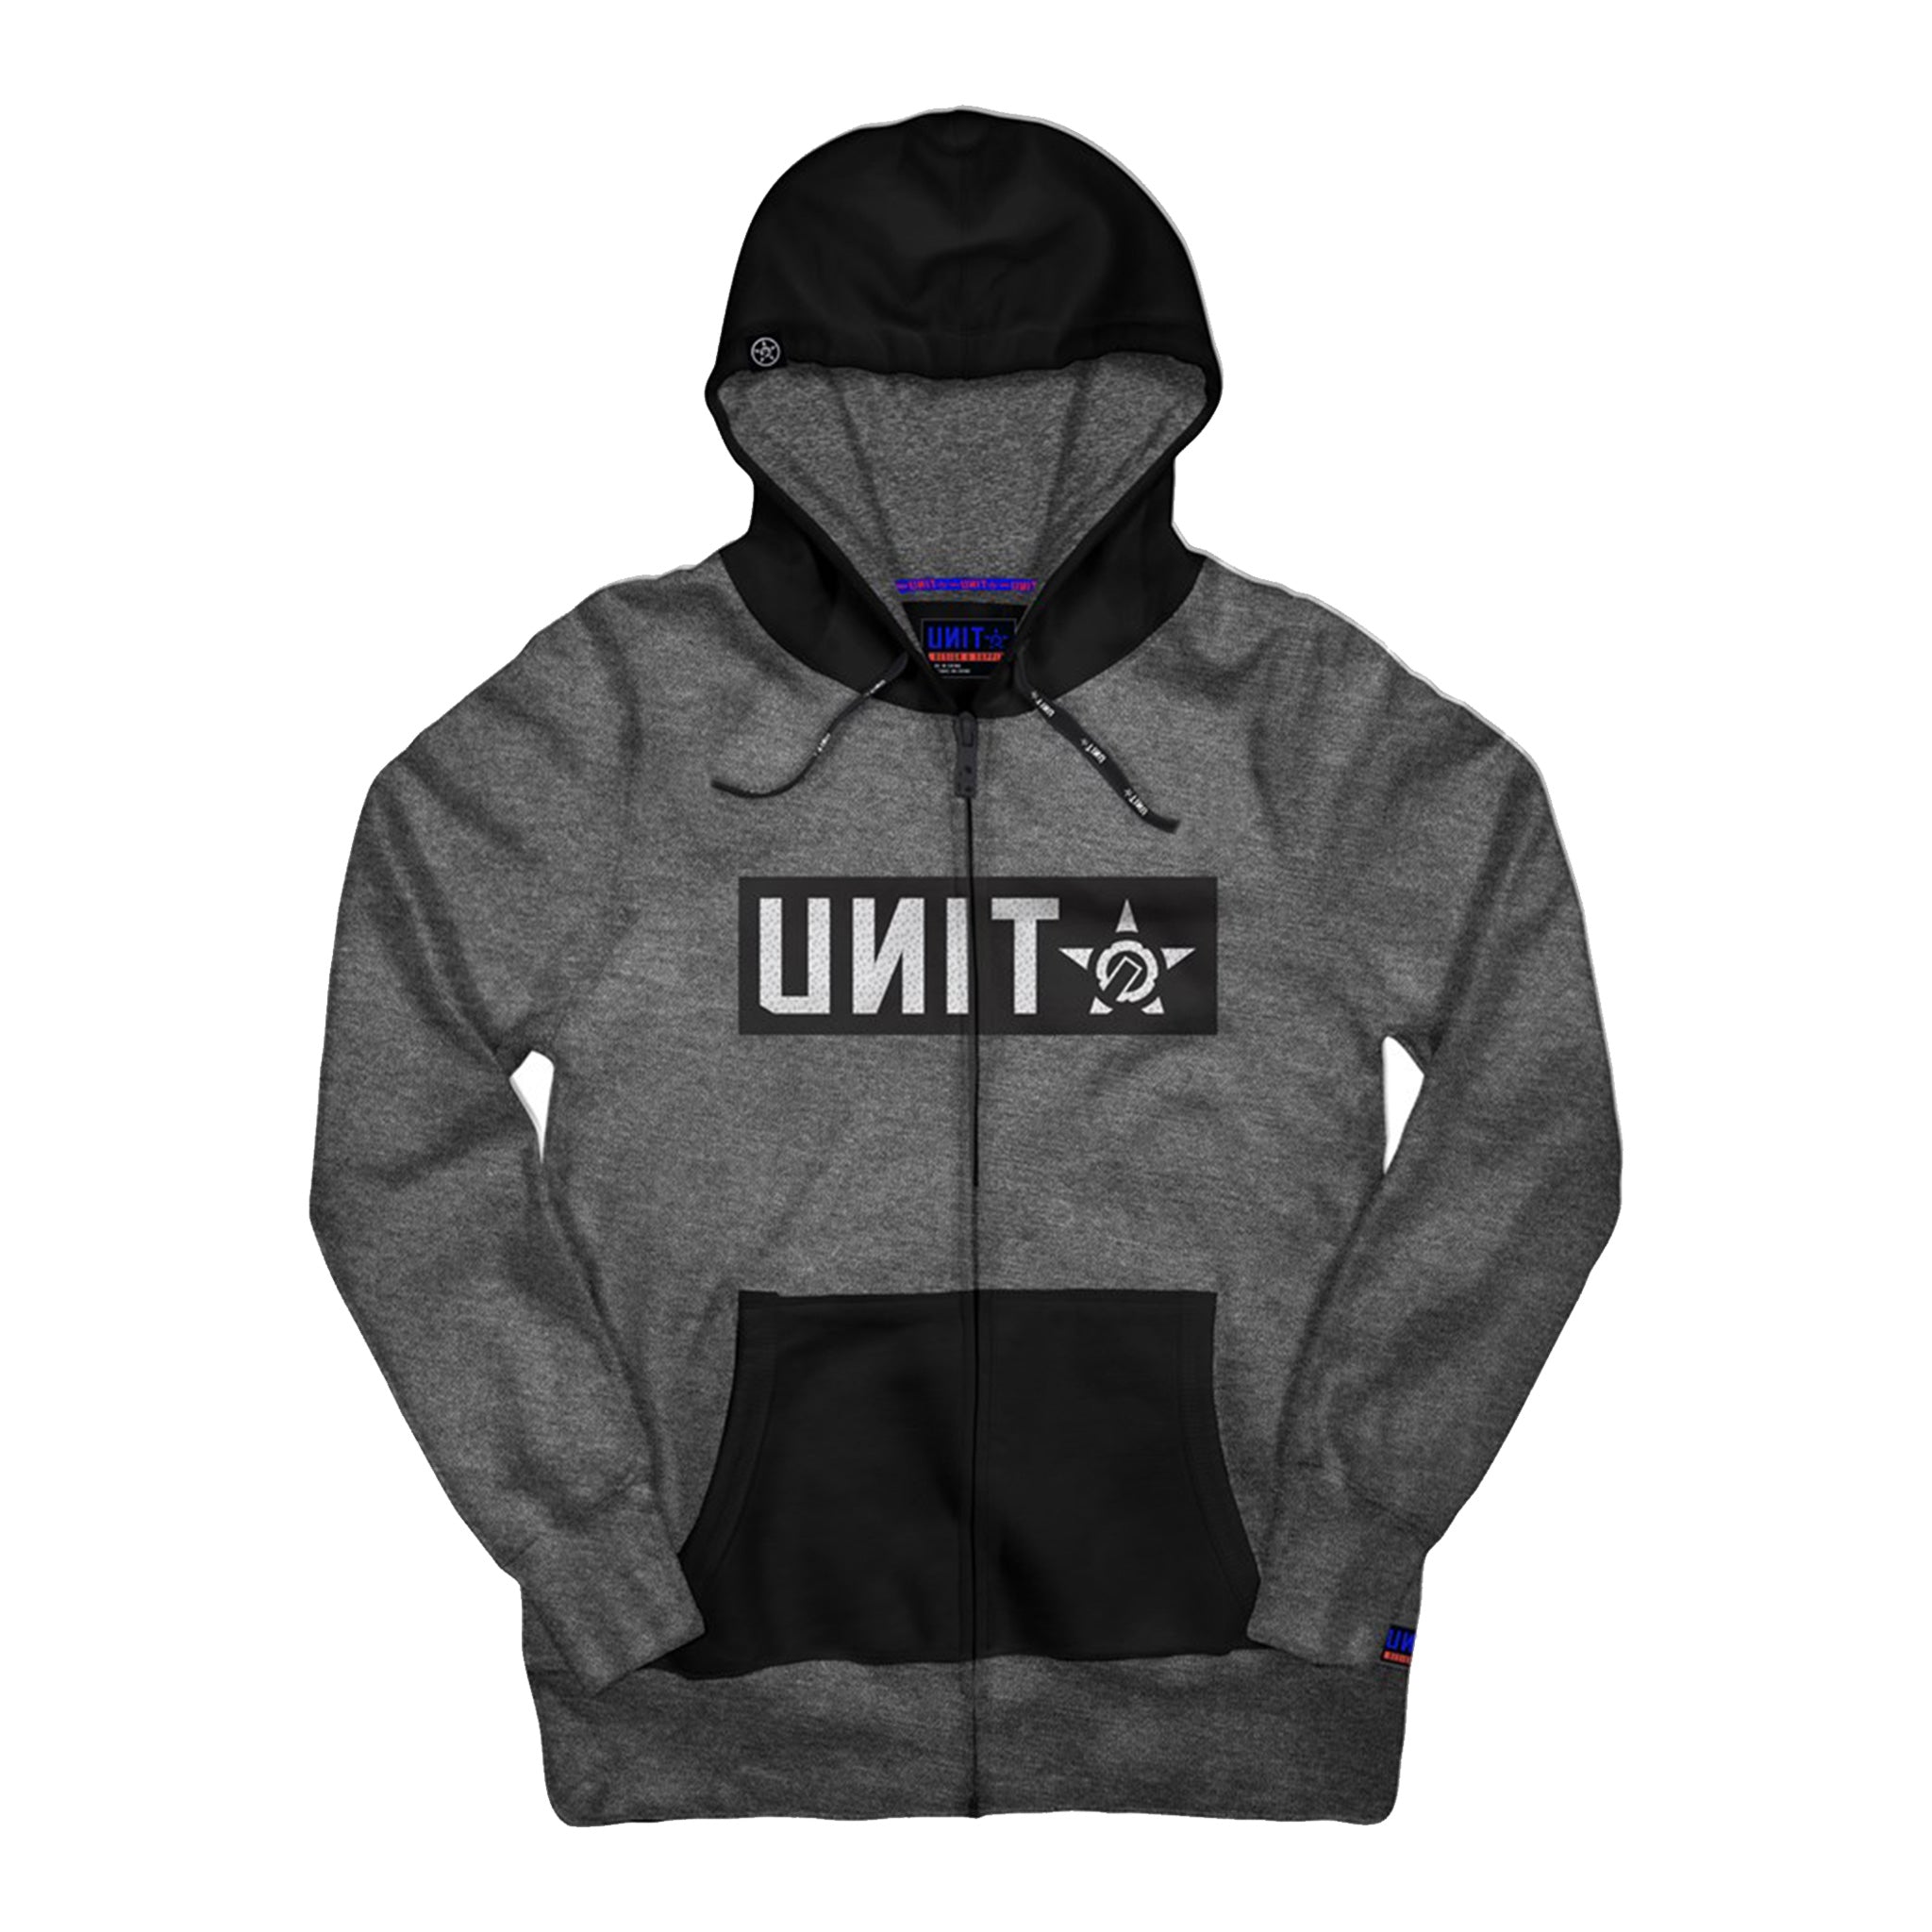 unit workwear shelter hoodie in charcoal